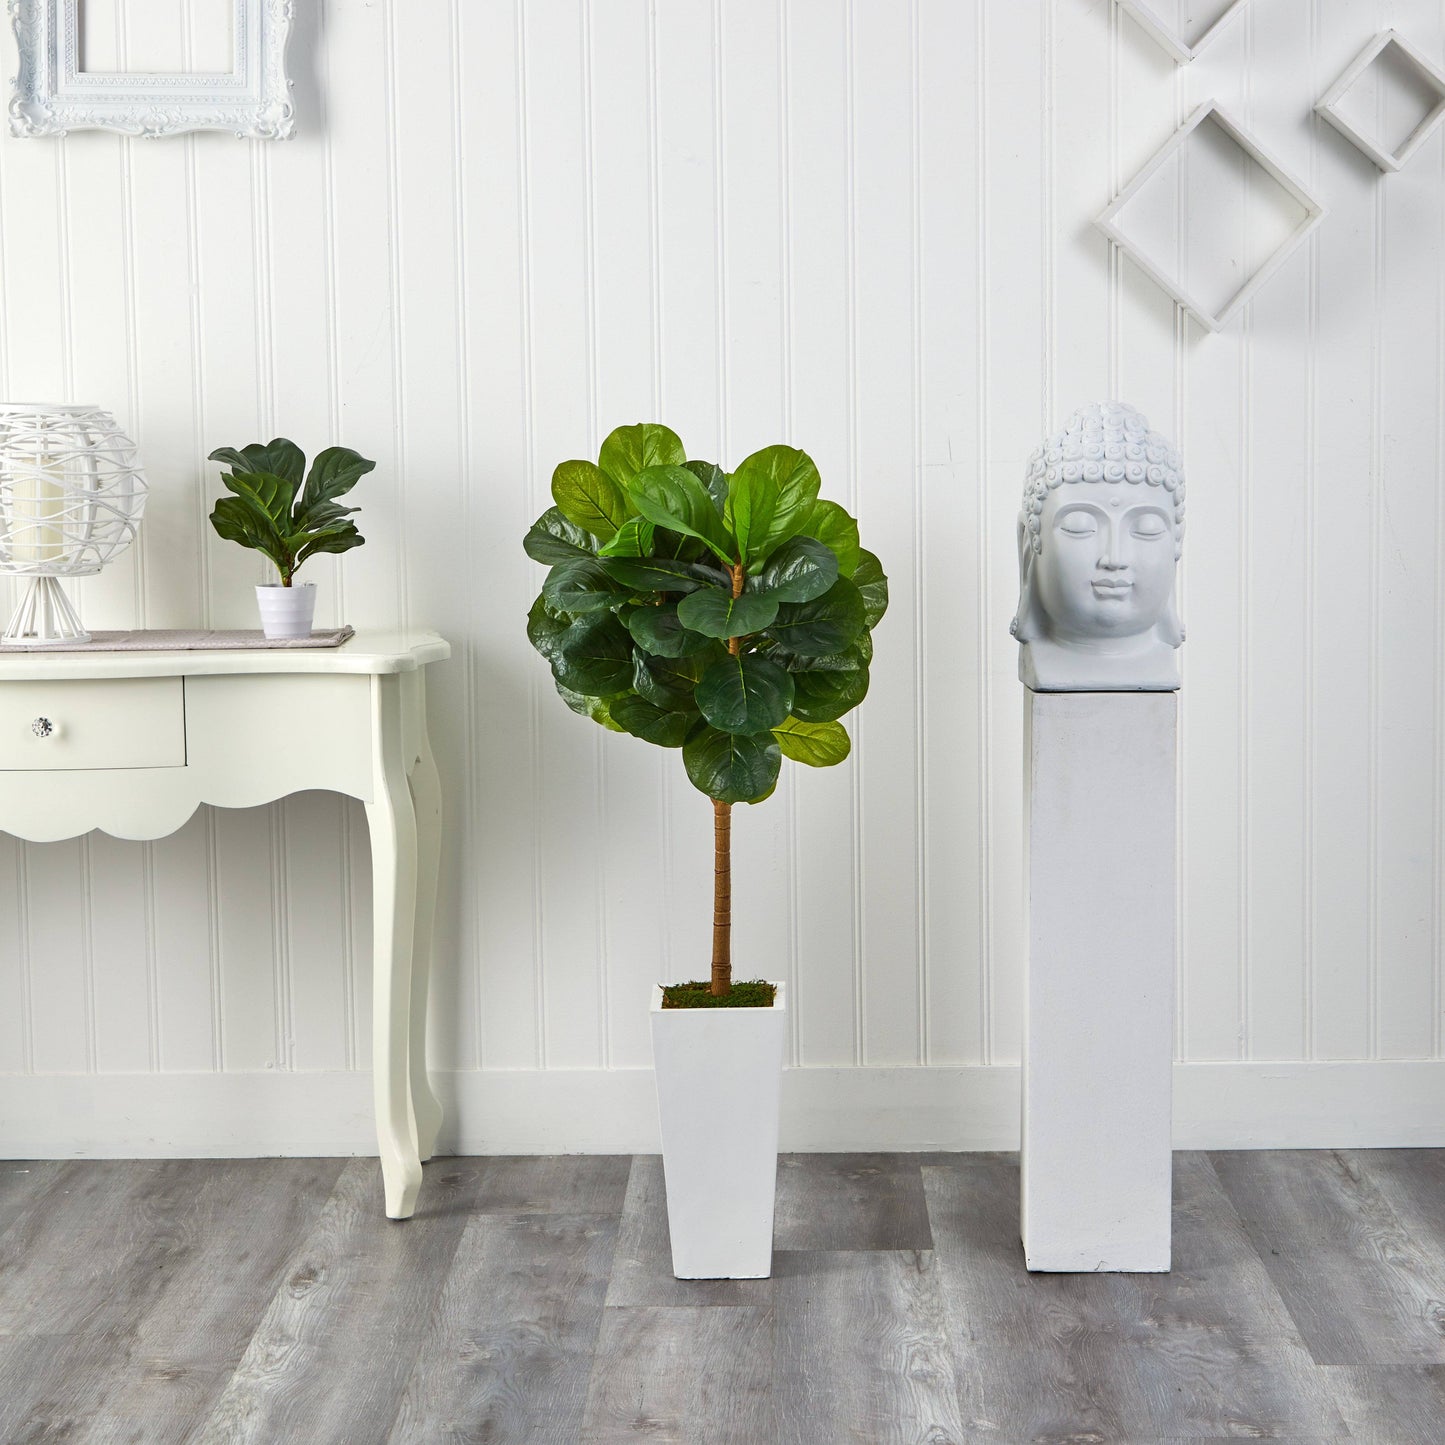 4’ Fiddle Leaf Artificial Tree in White Tower Planter by Nearly Natural